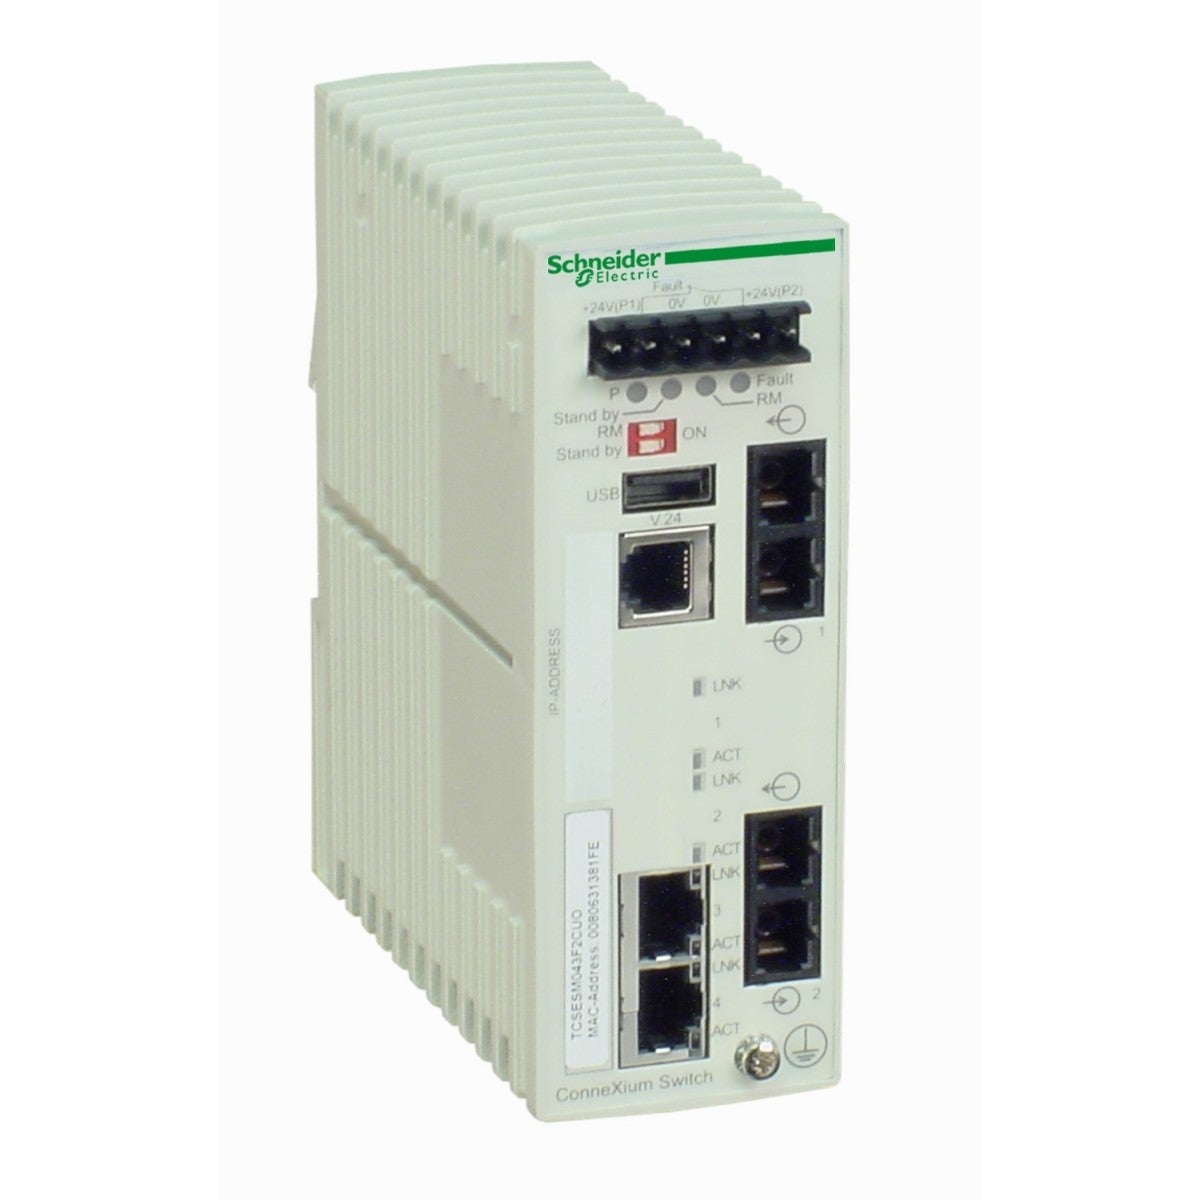 ConneXium Managed Switch - 2 ports for copper + 2 ports for fiber optic multimode